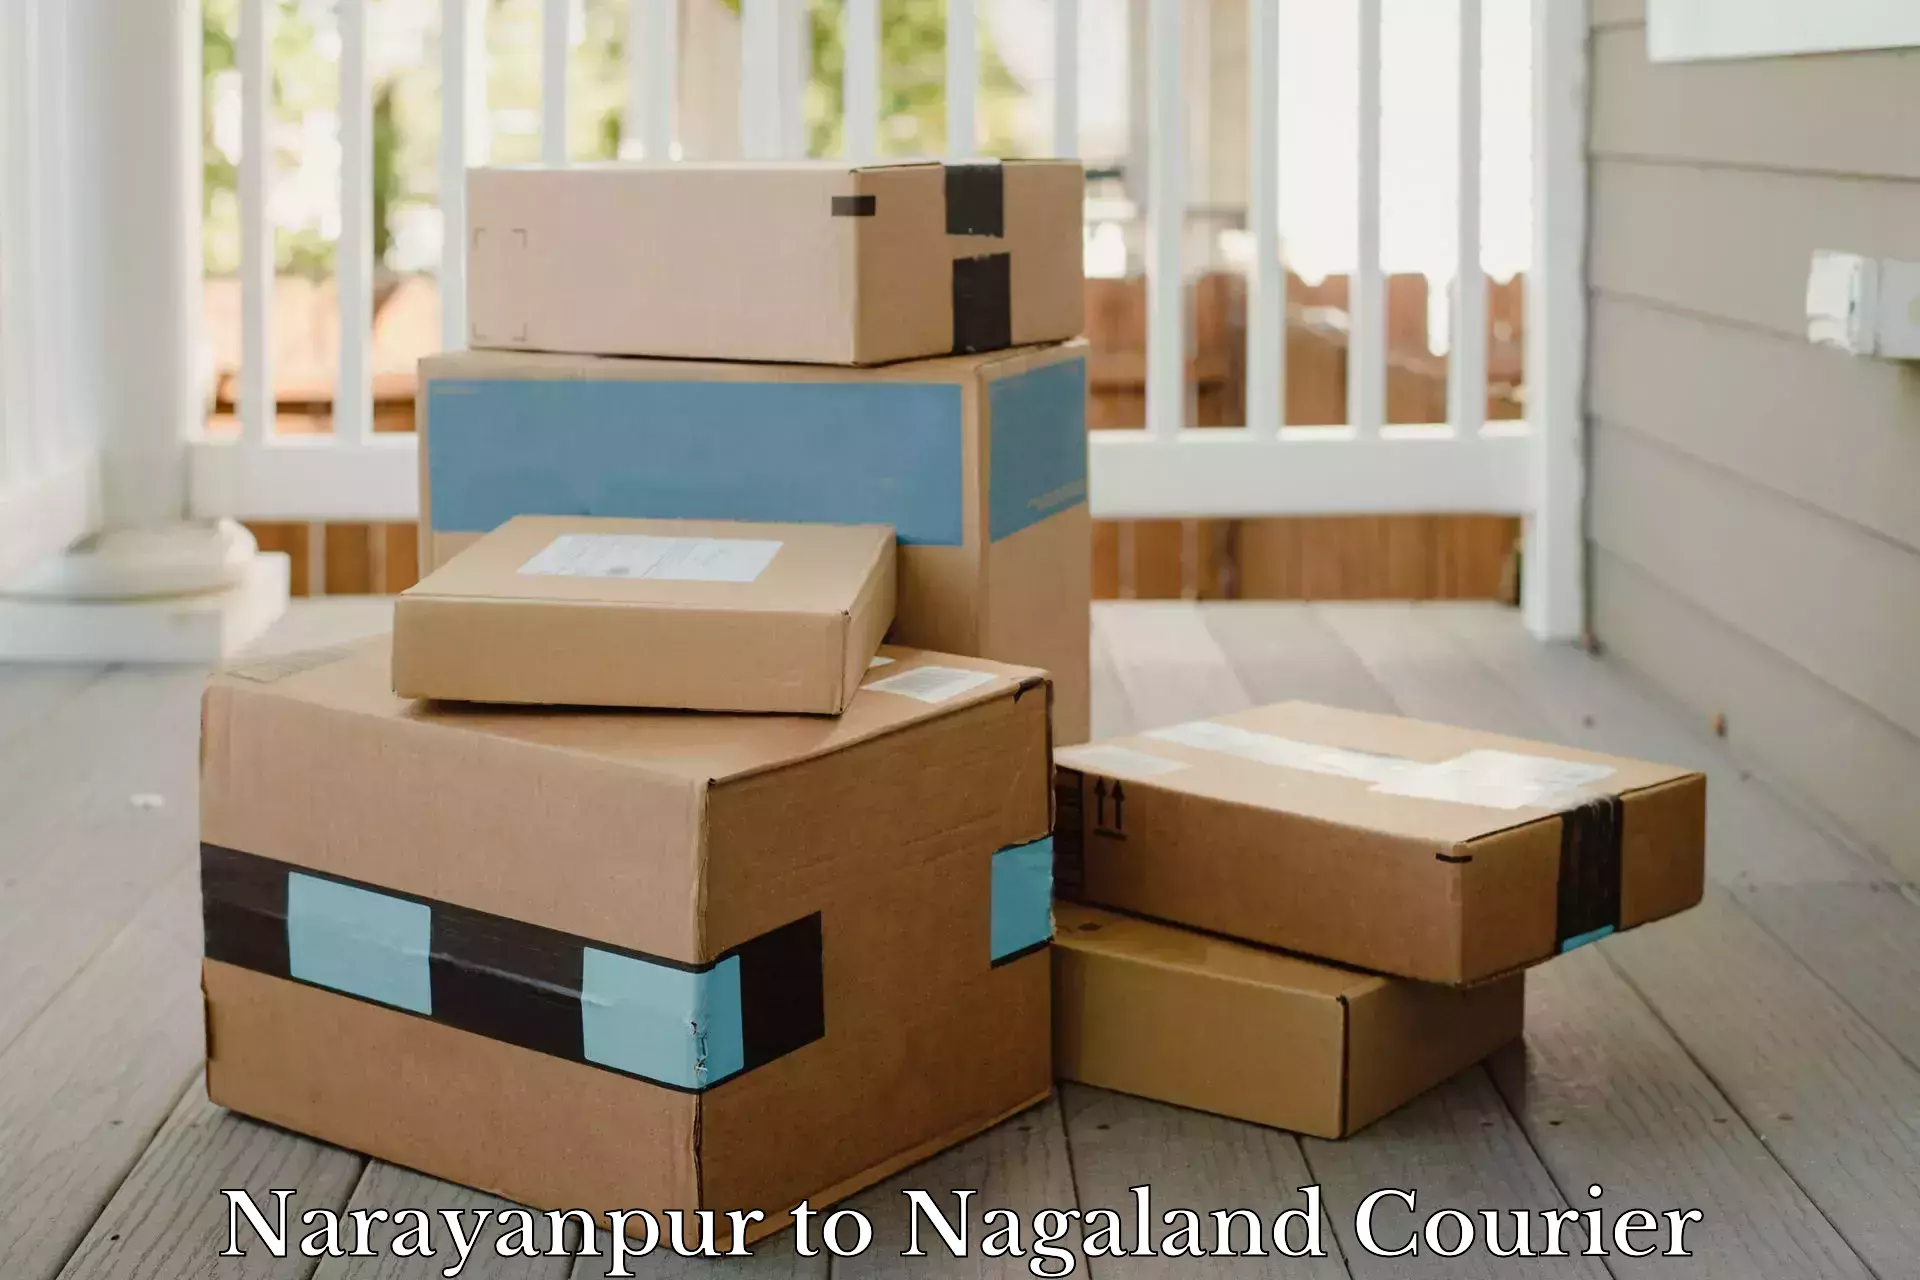 Business delivery service in Narayanpur to Nagaland